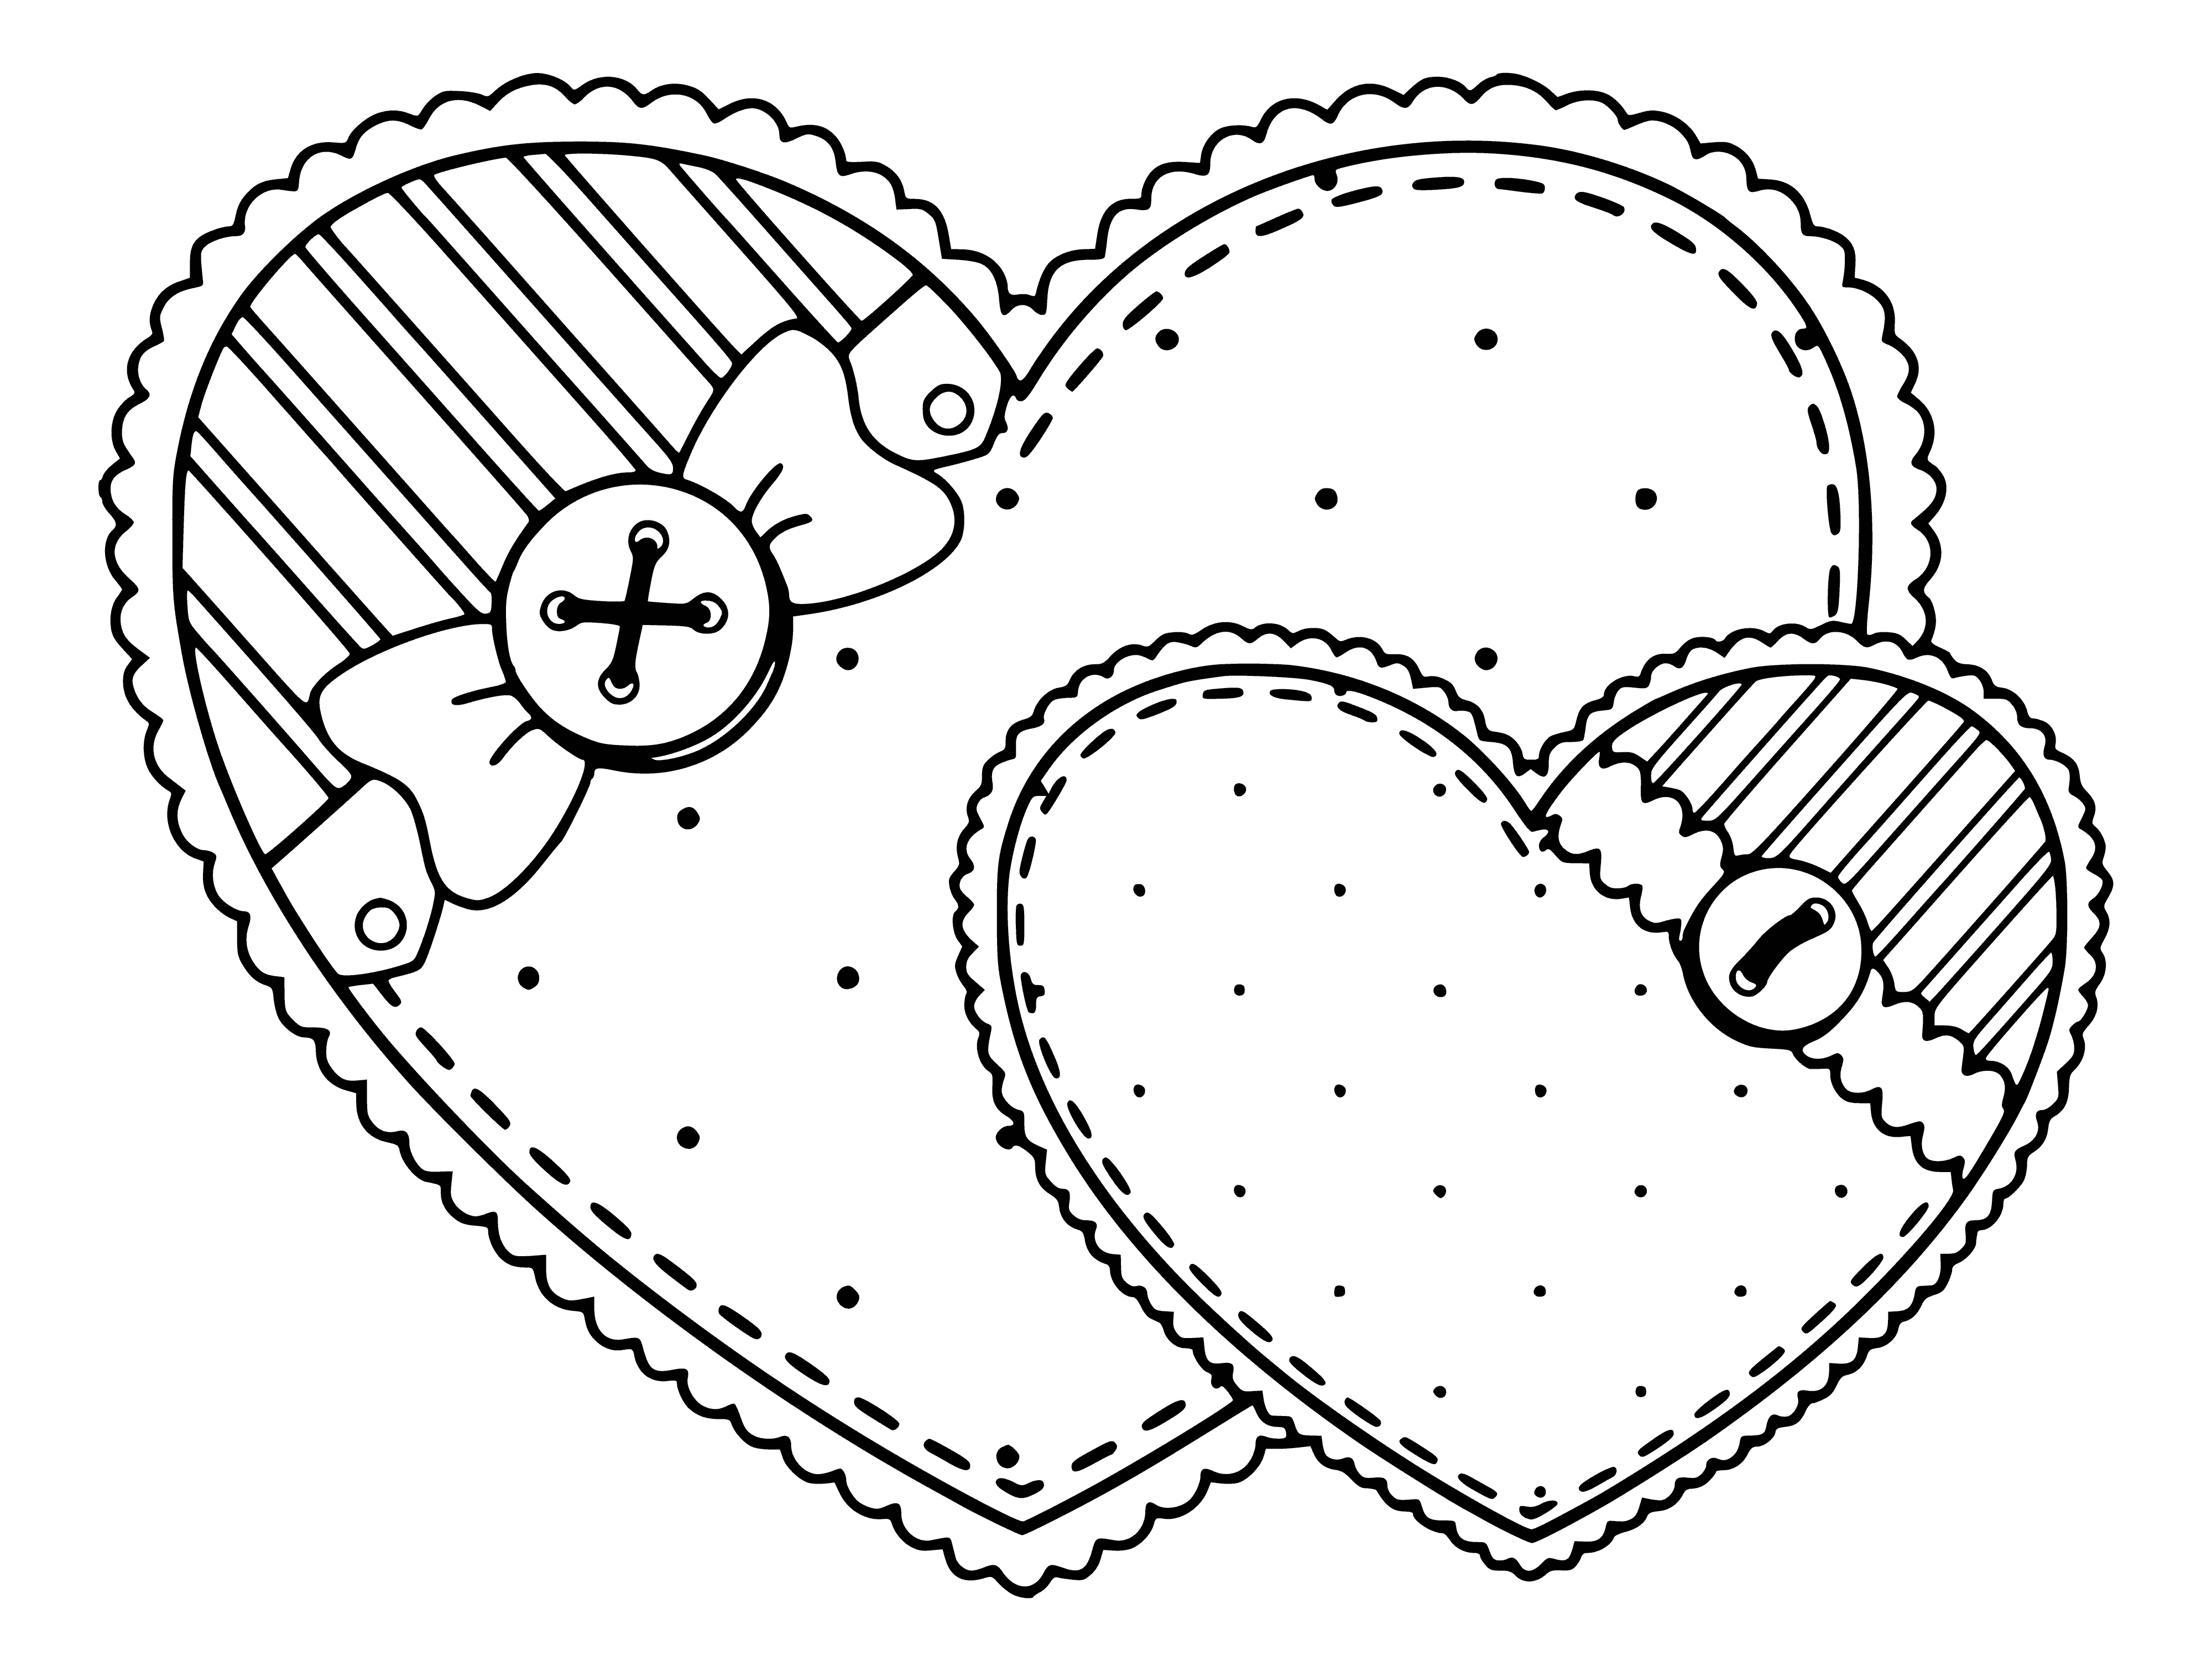 coloring page: Two hearts, red and pink, facing each other and joined at the bottom, create an inviting white space in between.